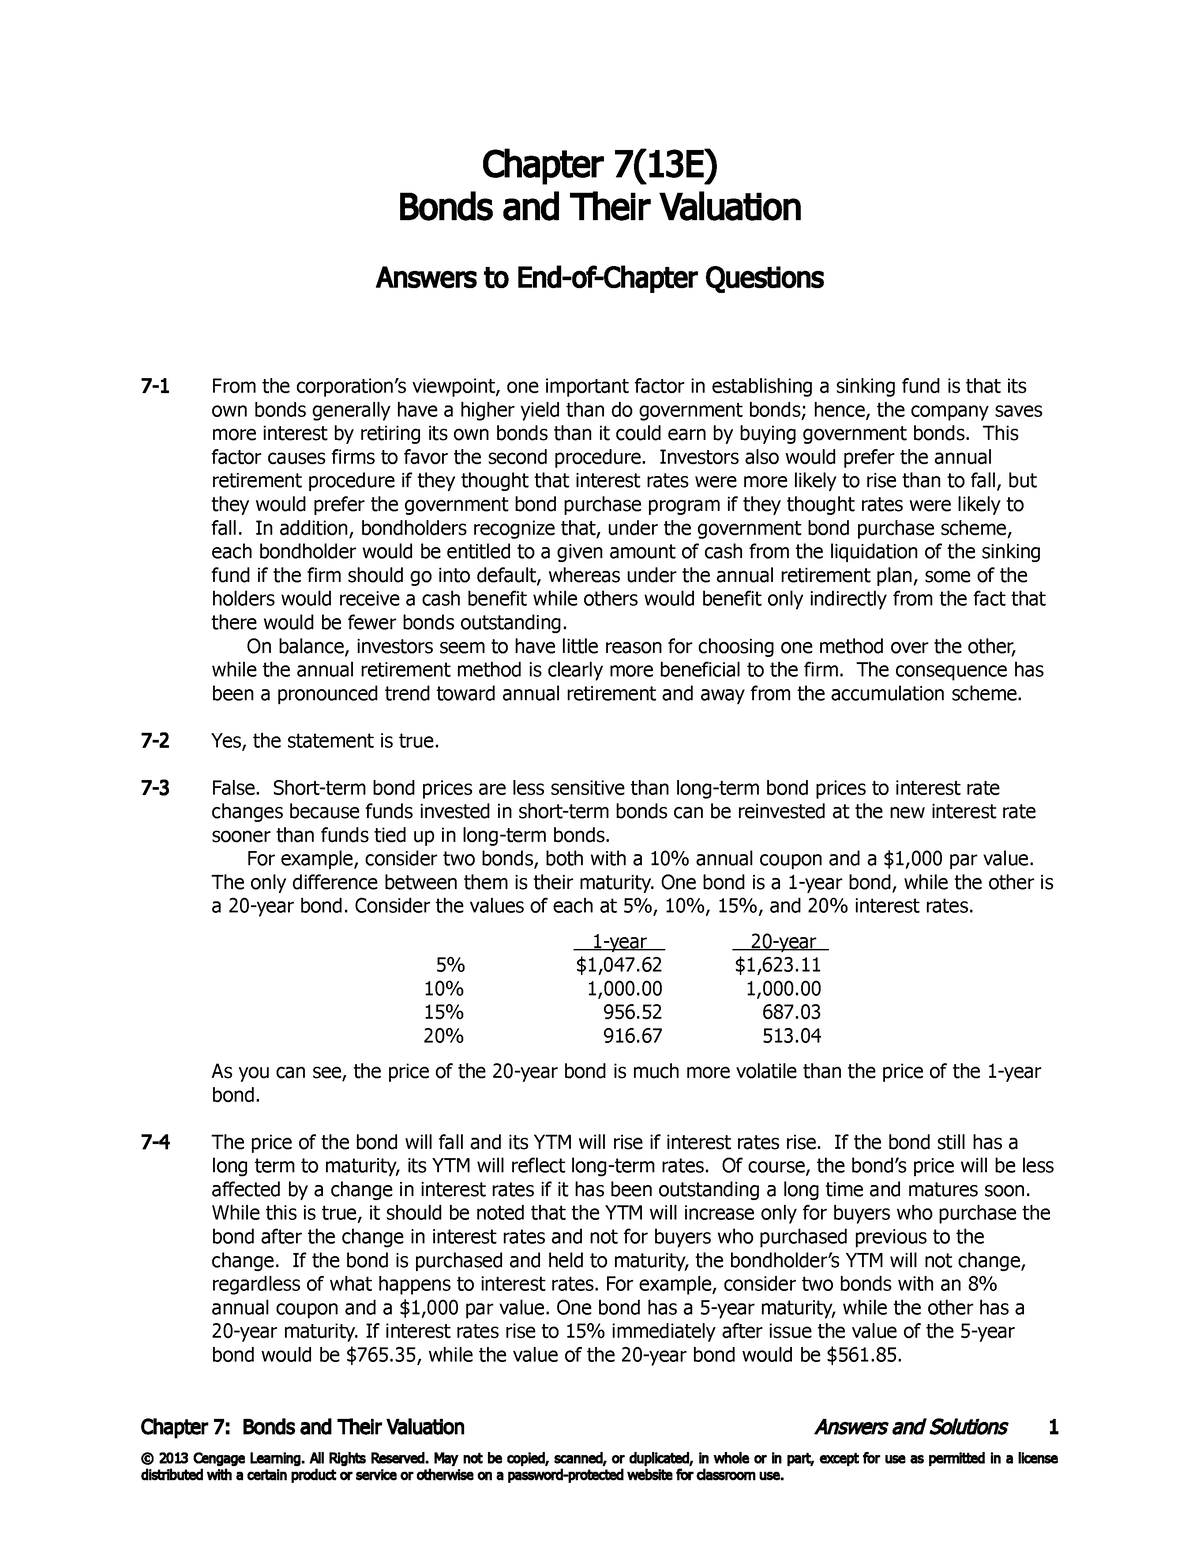 07-answers-to-all-problems-1-chapter-7-13-e-bonds-and-their-valuation-answers-to-end-of